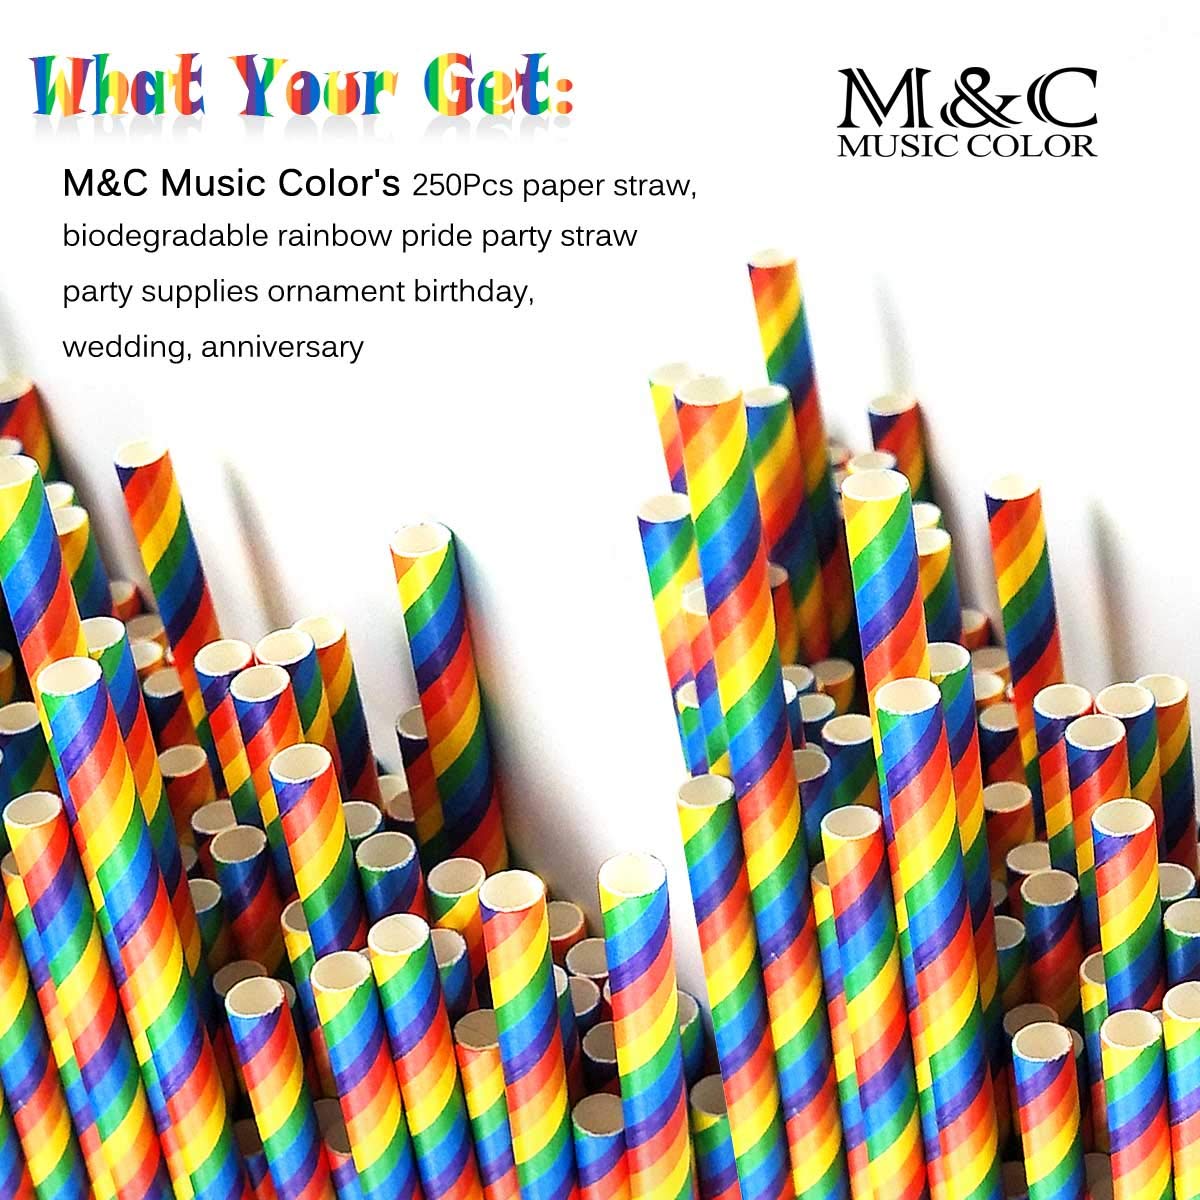 250Pcs Rainbow Paper Straws,Biodegradable Straws Pride Party Drinking Straws, Colorful Straws for Party Supplies Decorations Birthday Wedding Anniversary Christmas - Practical & Eco-Friendly